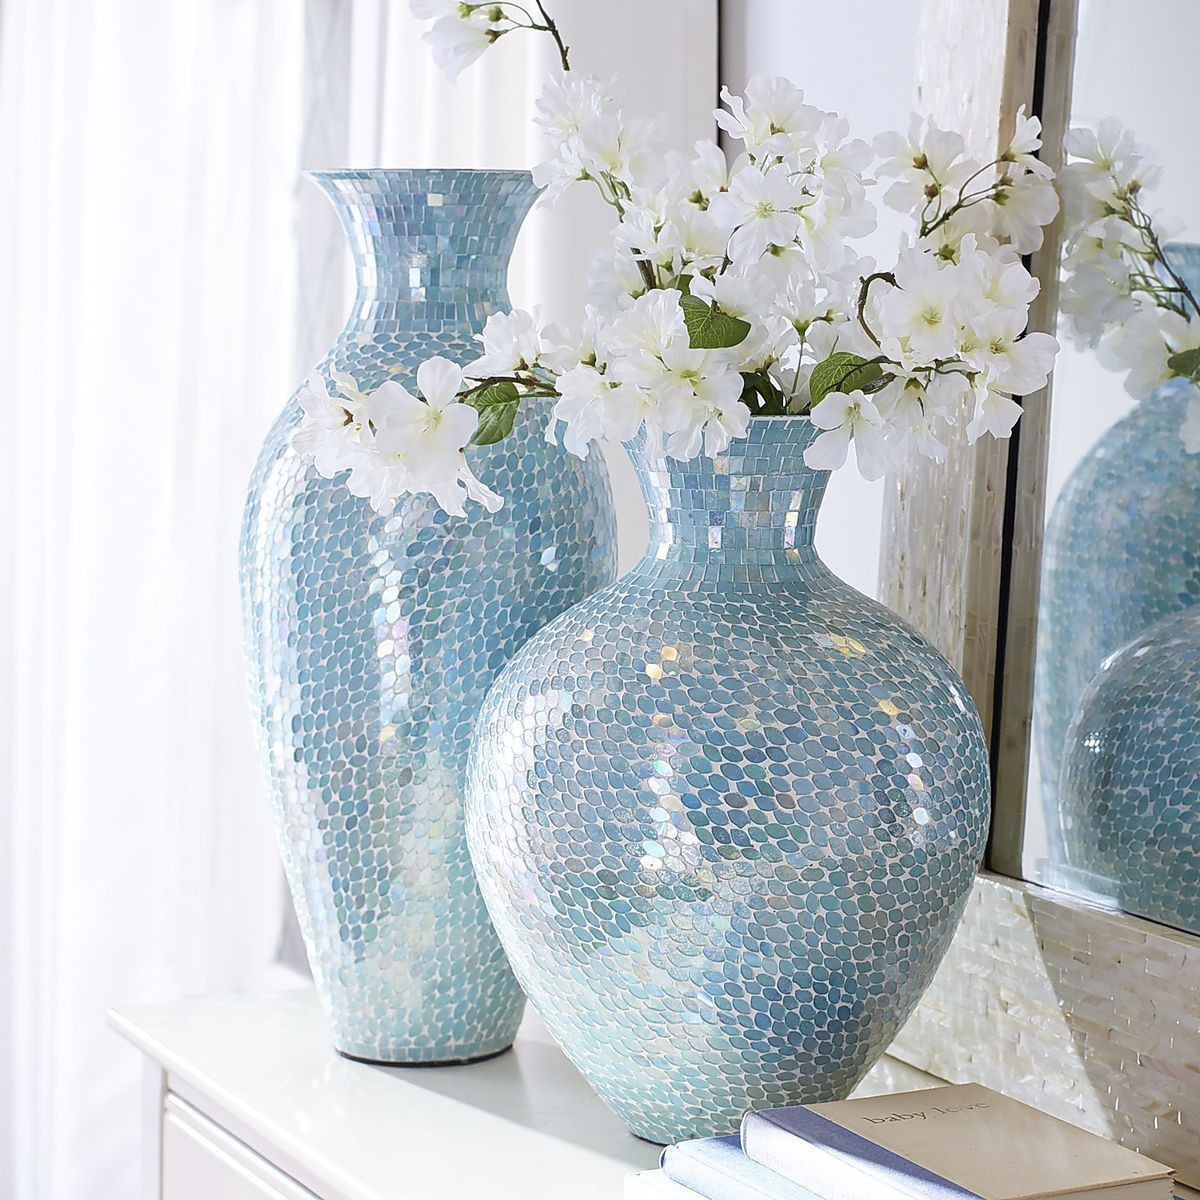 11 Cute Pier One Terracotta Vase 2024 free download pier one terracotta vase of aqua mosaic vases pier 1 imports spectacular handcrafted iron throughout aqua mosaic vases pier 1 imports spectacular handcrafted iron vases clad in glittering gl